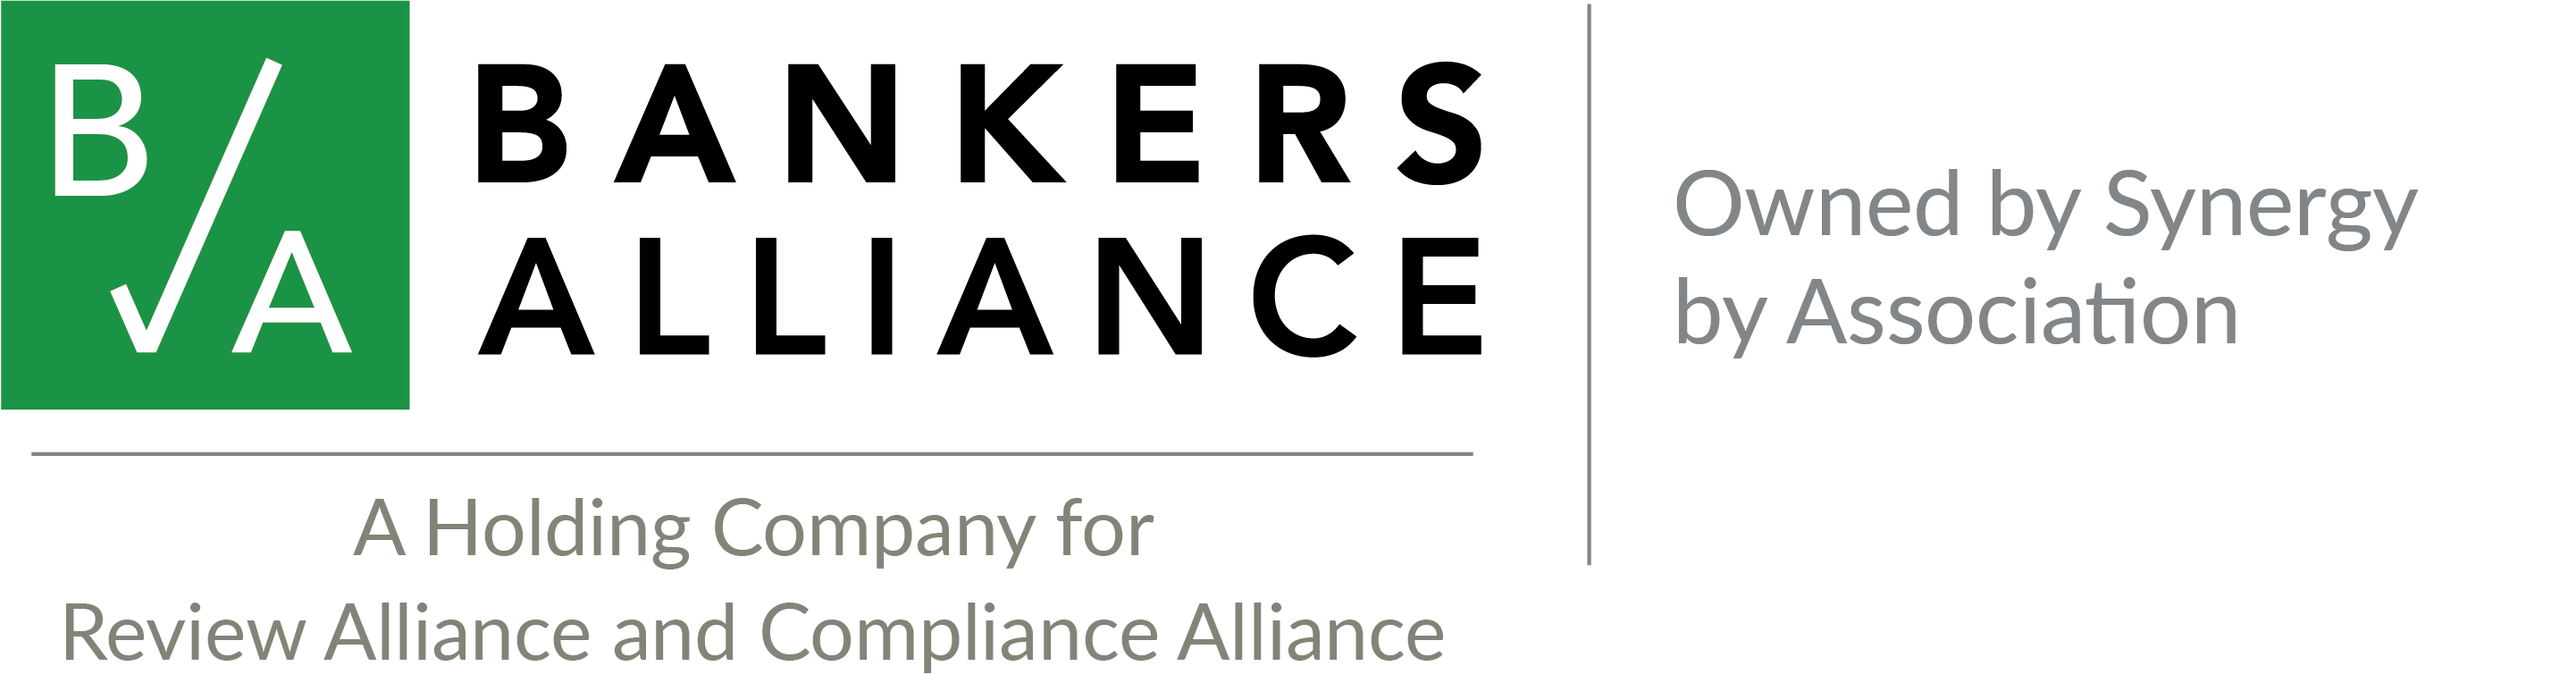 Bankers Alliance